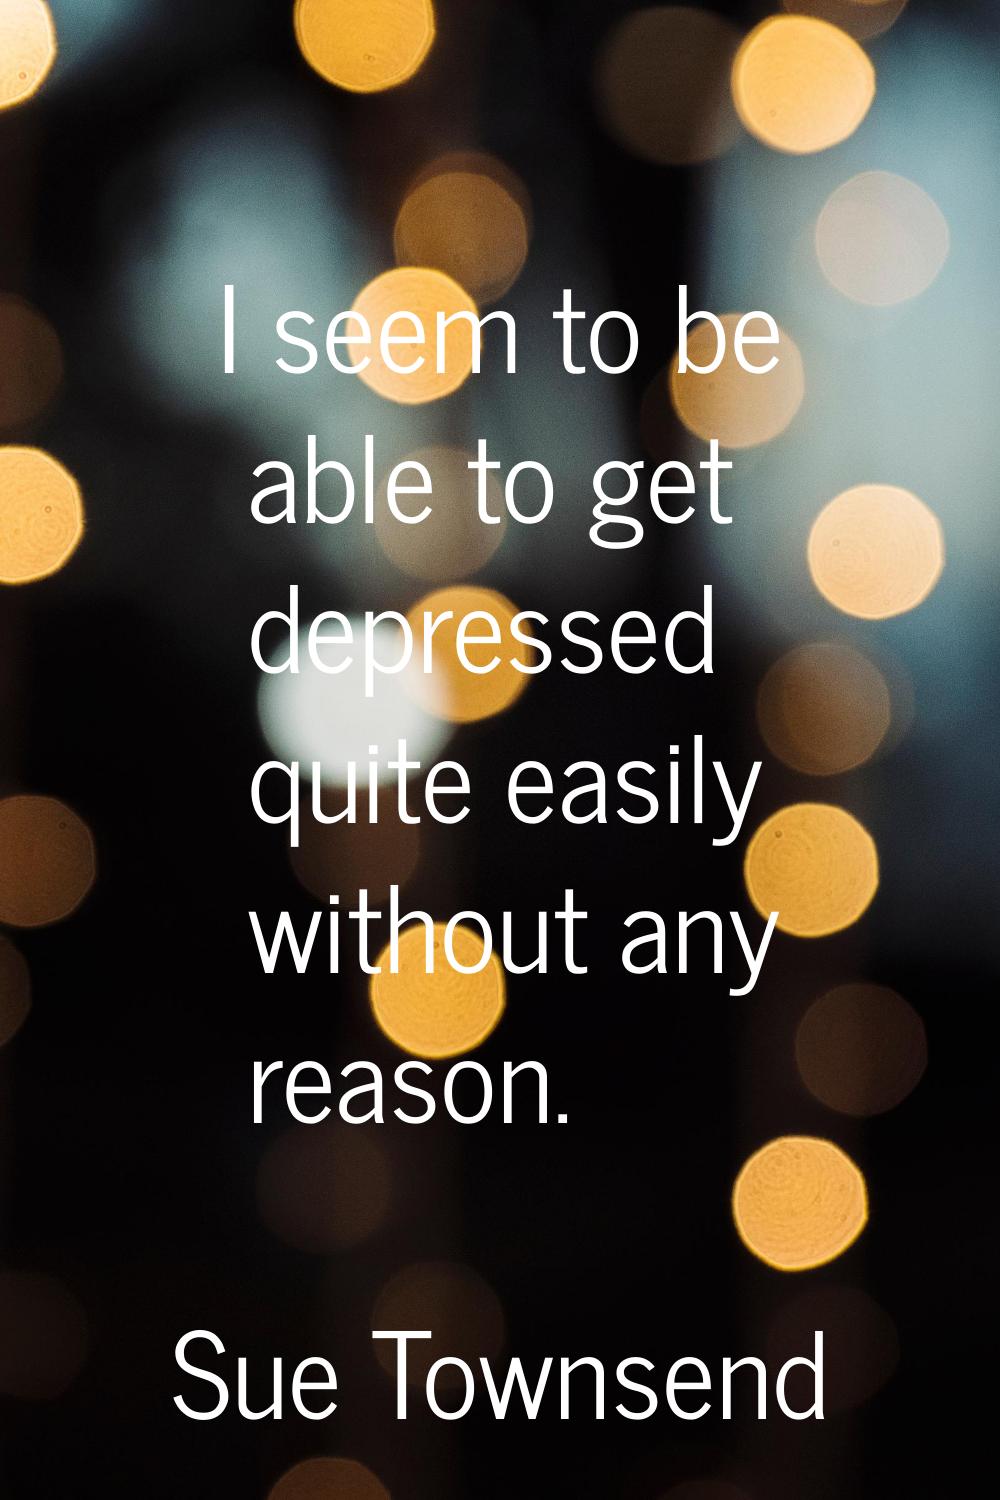 I seem to be able to get depressed quite easily without any reason.